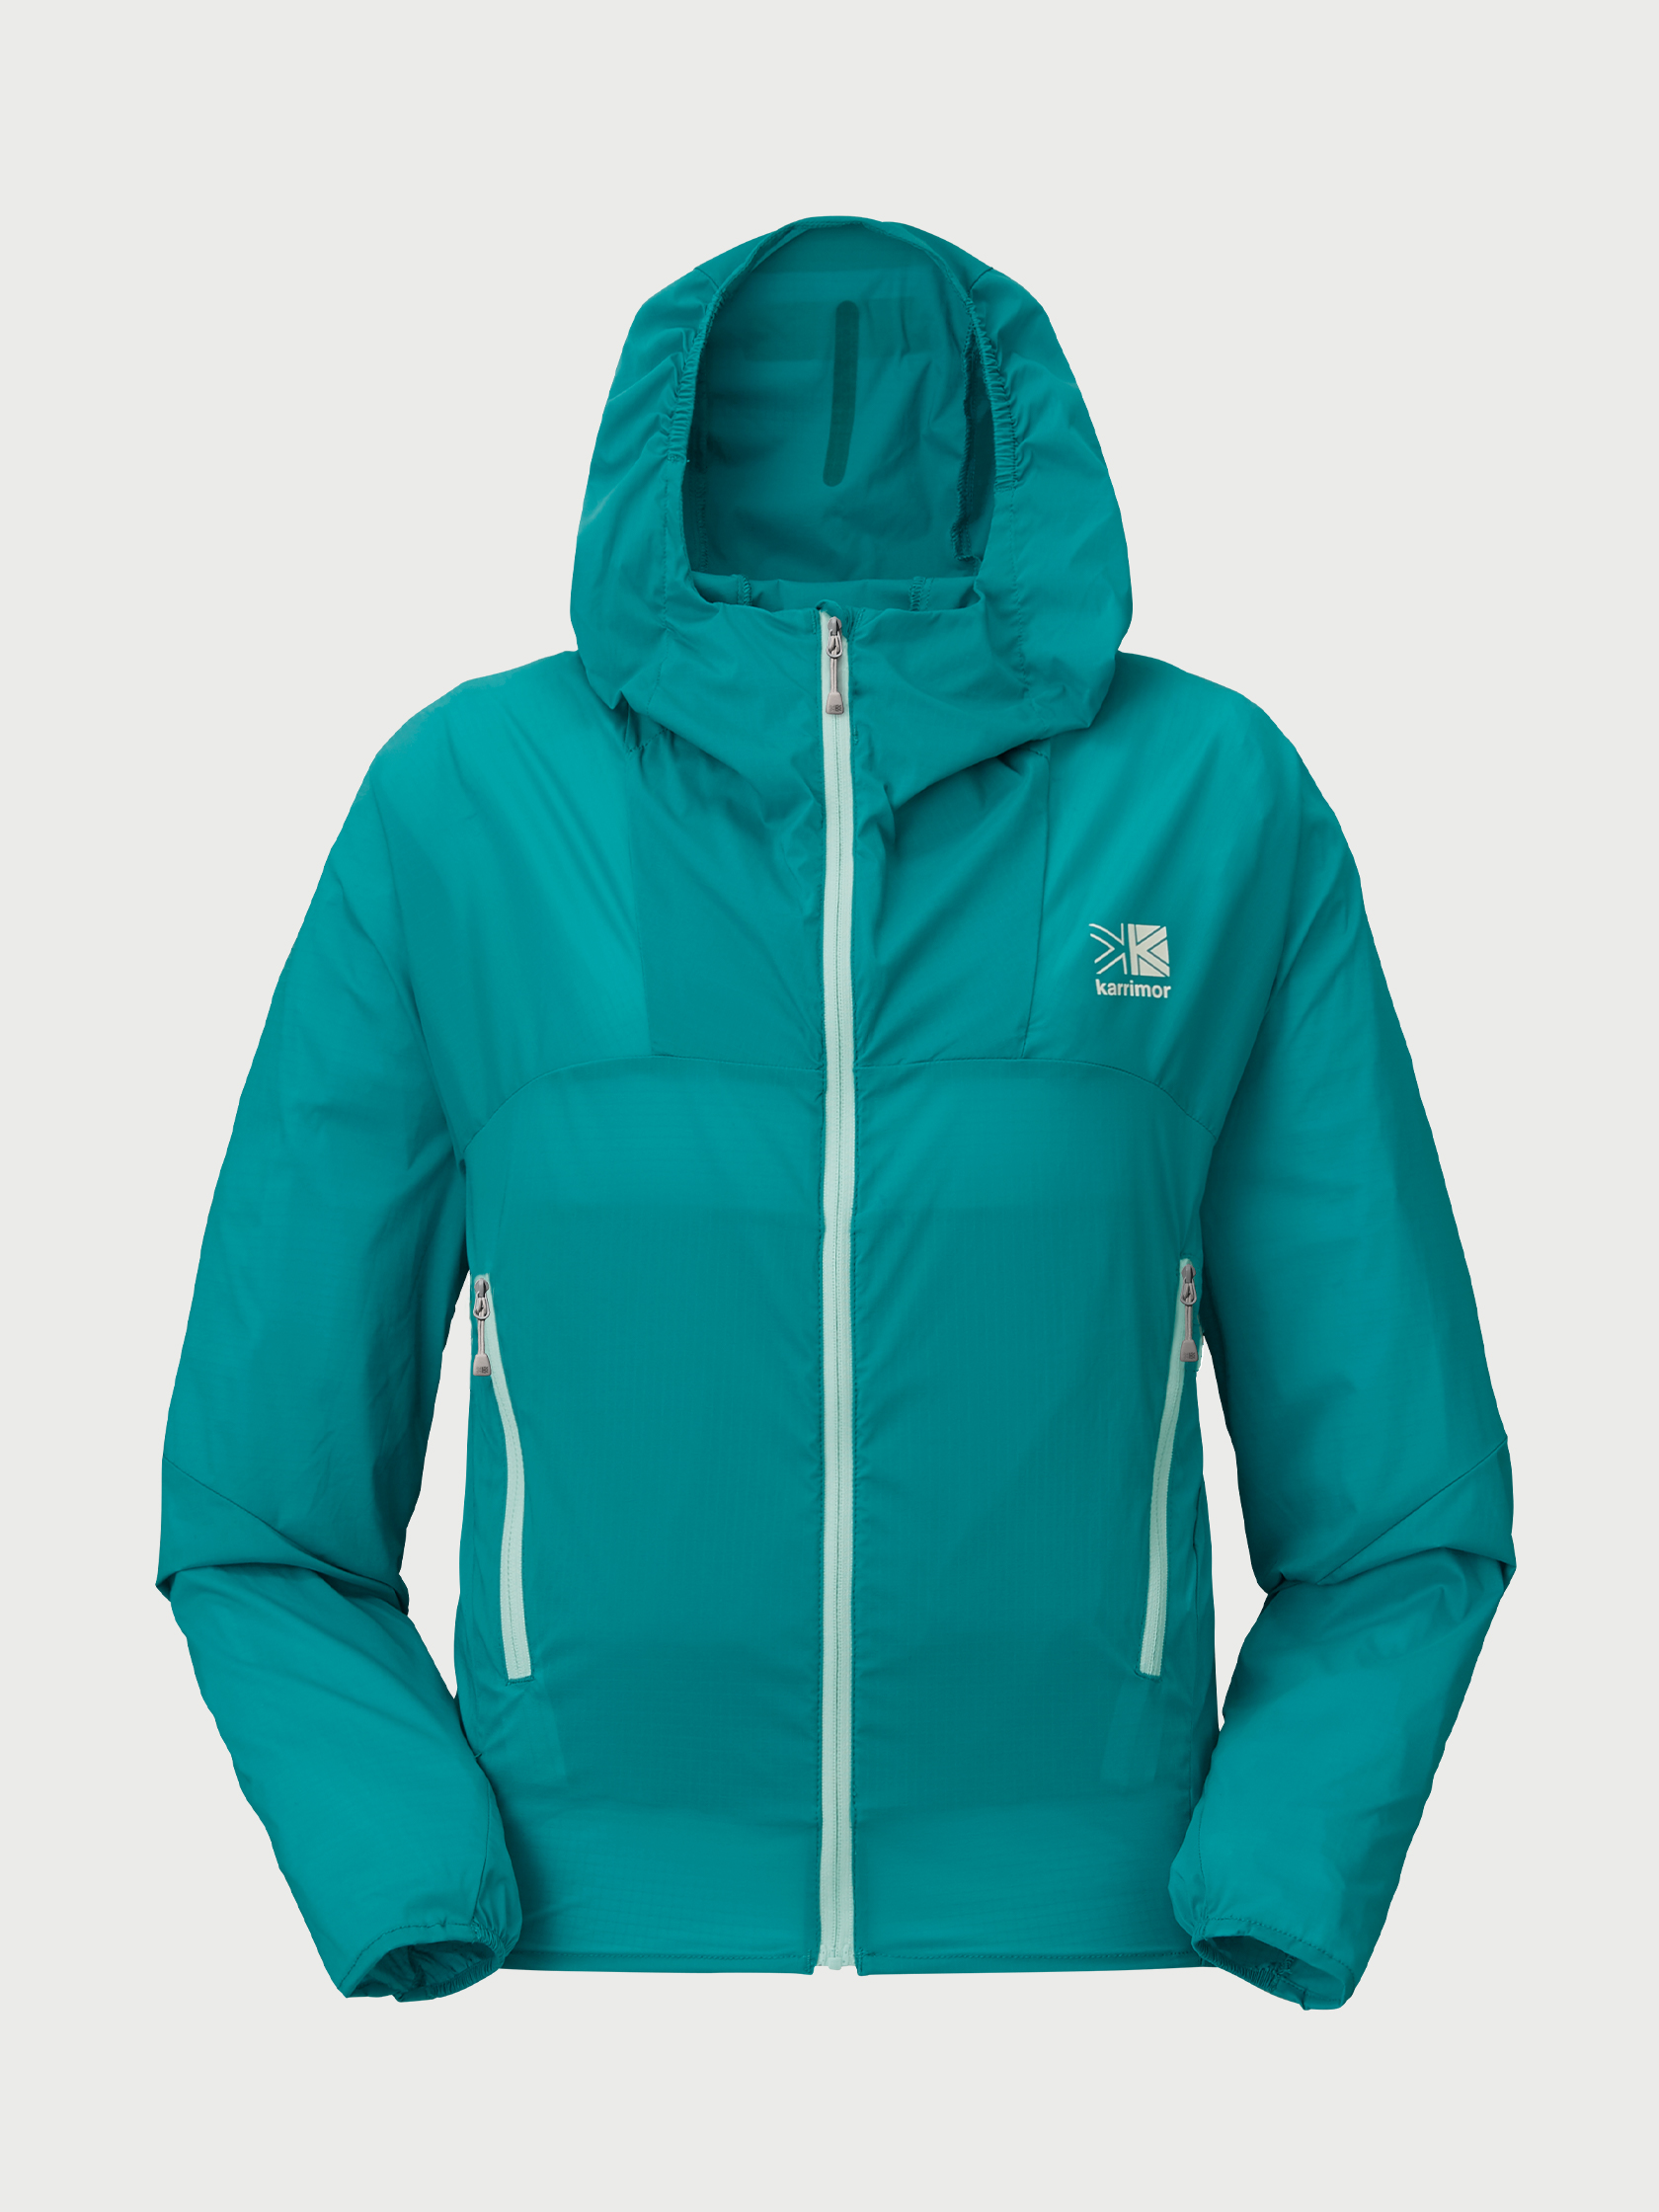 wind shell hoodie W's | karrimor カリマー | リュックサック 